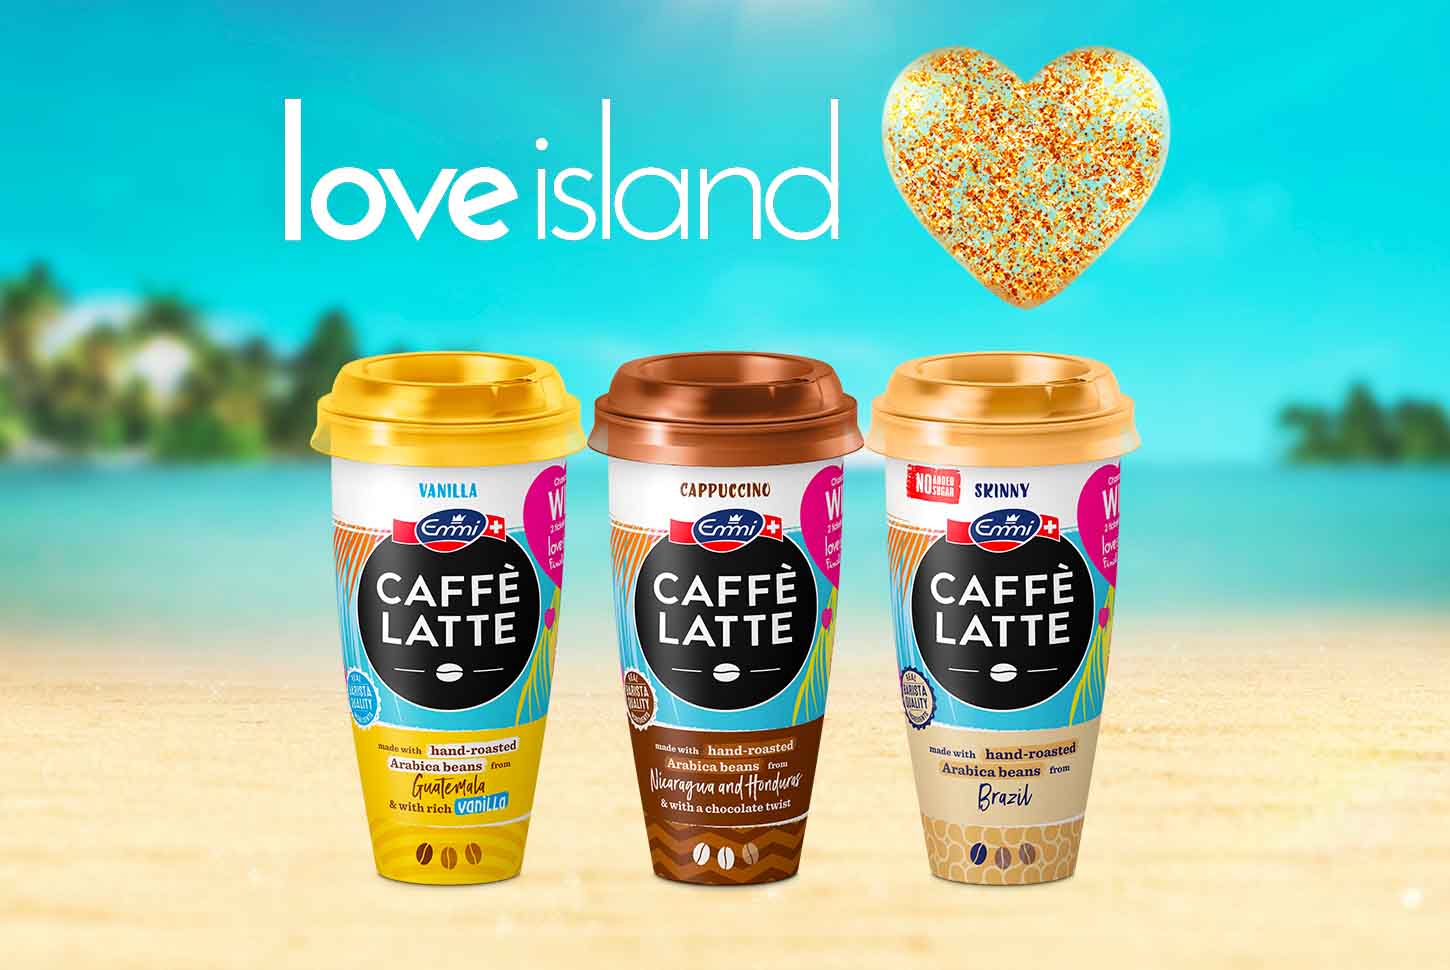 Now Love Island has a ‘coffee partner’ in Emmi Caffe Latte